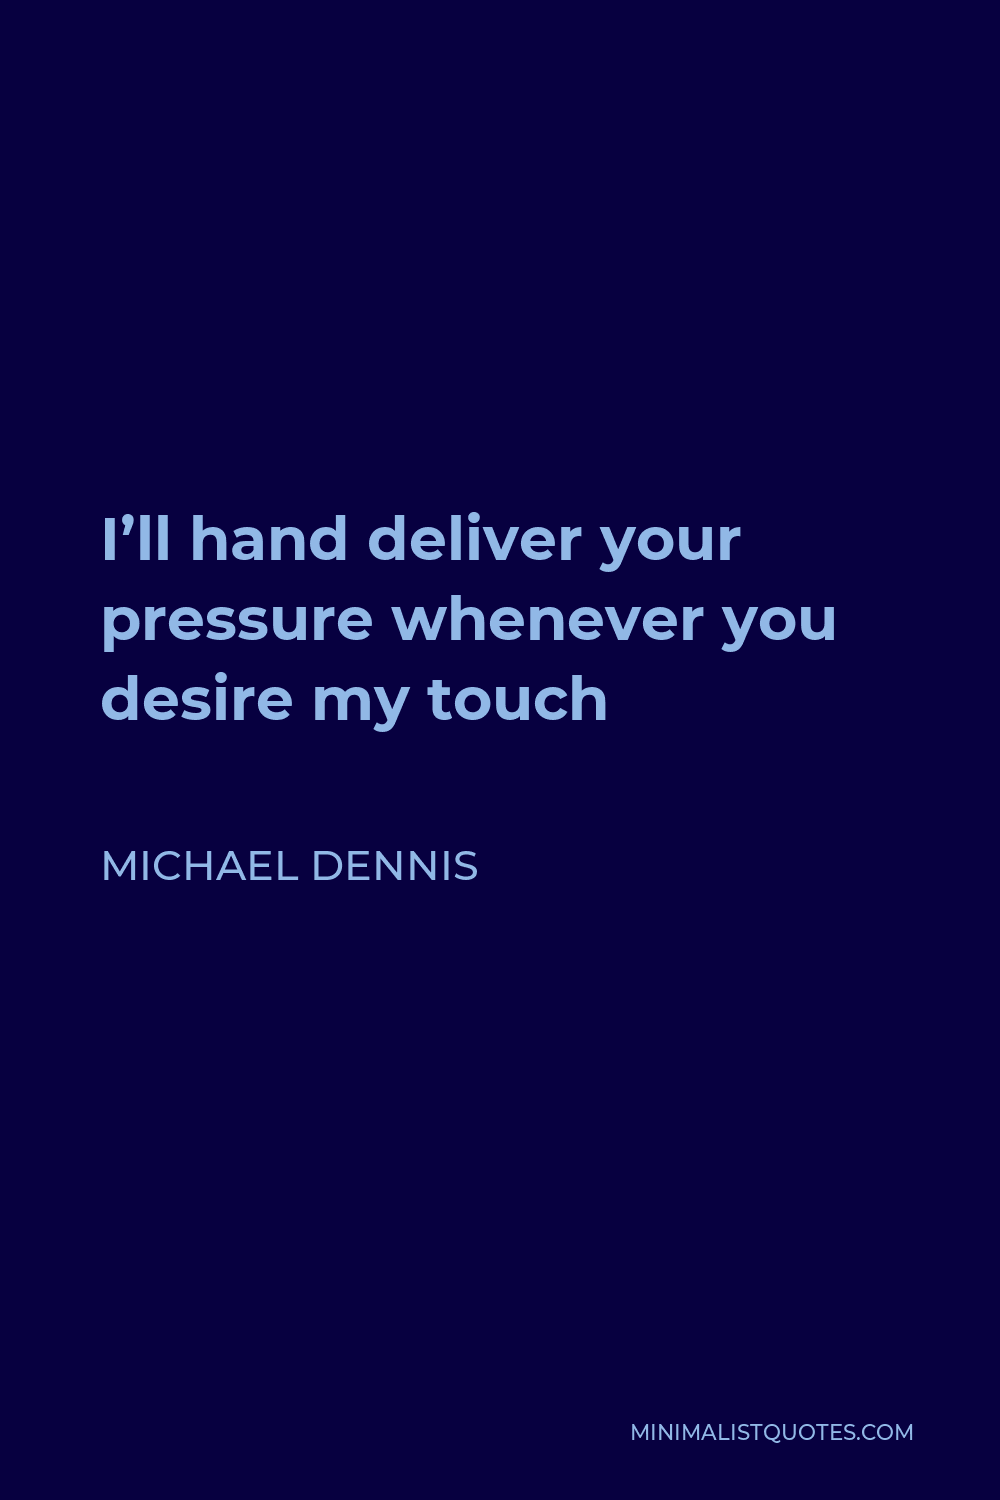 Michael Dennis Quote - I’ll hand deliver your pressure whenever you desire my touch